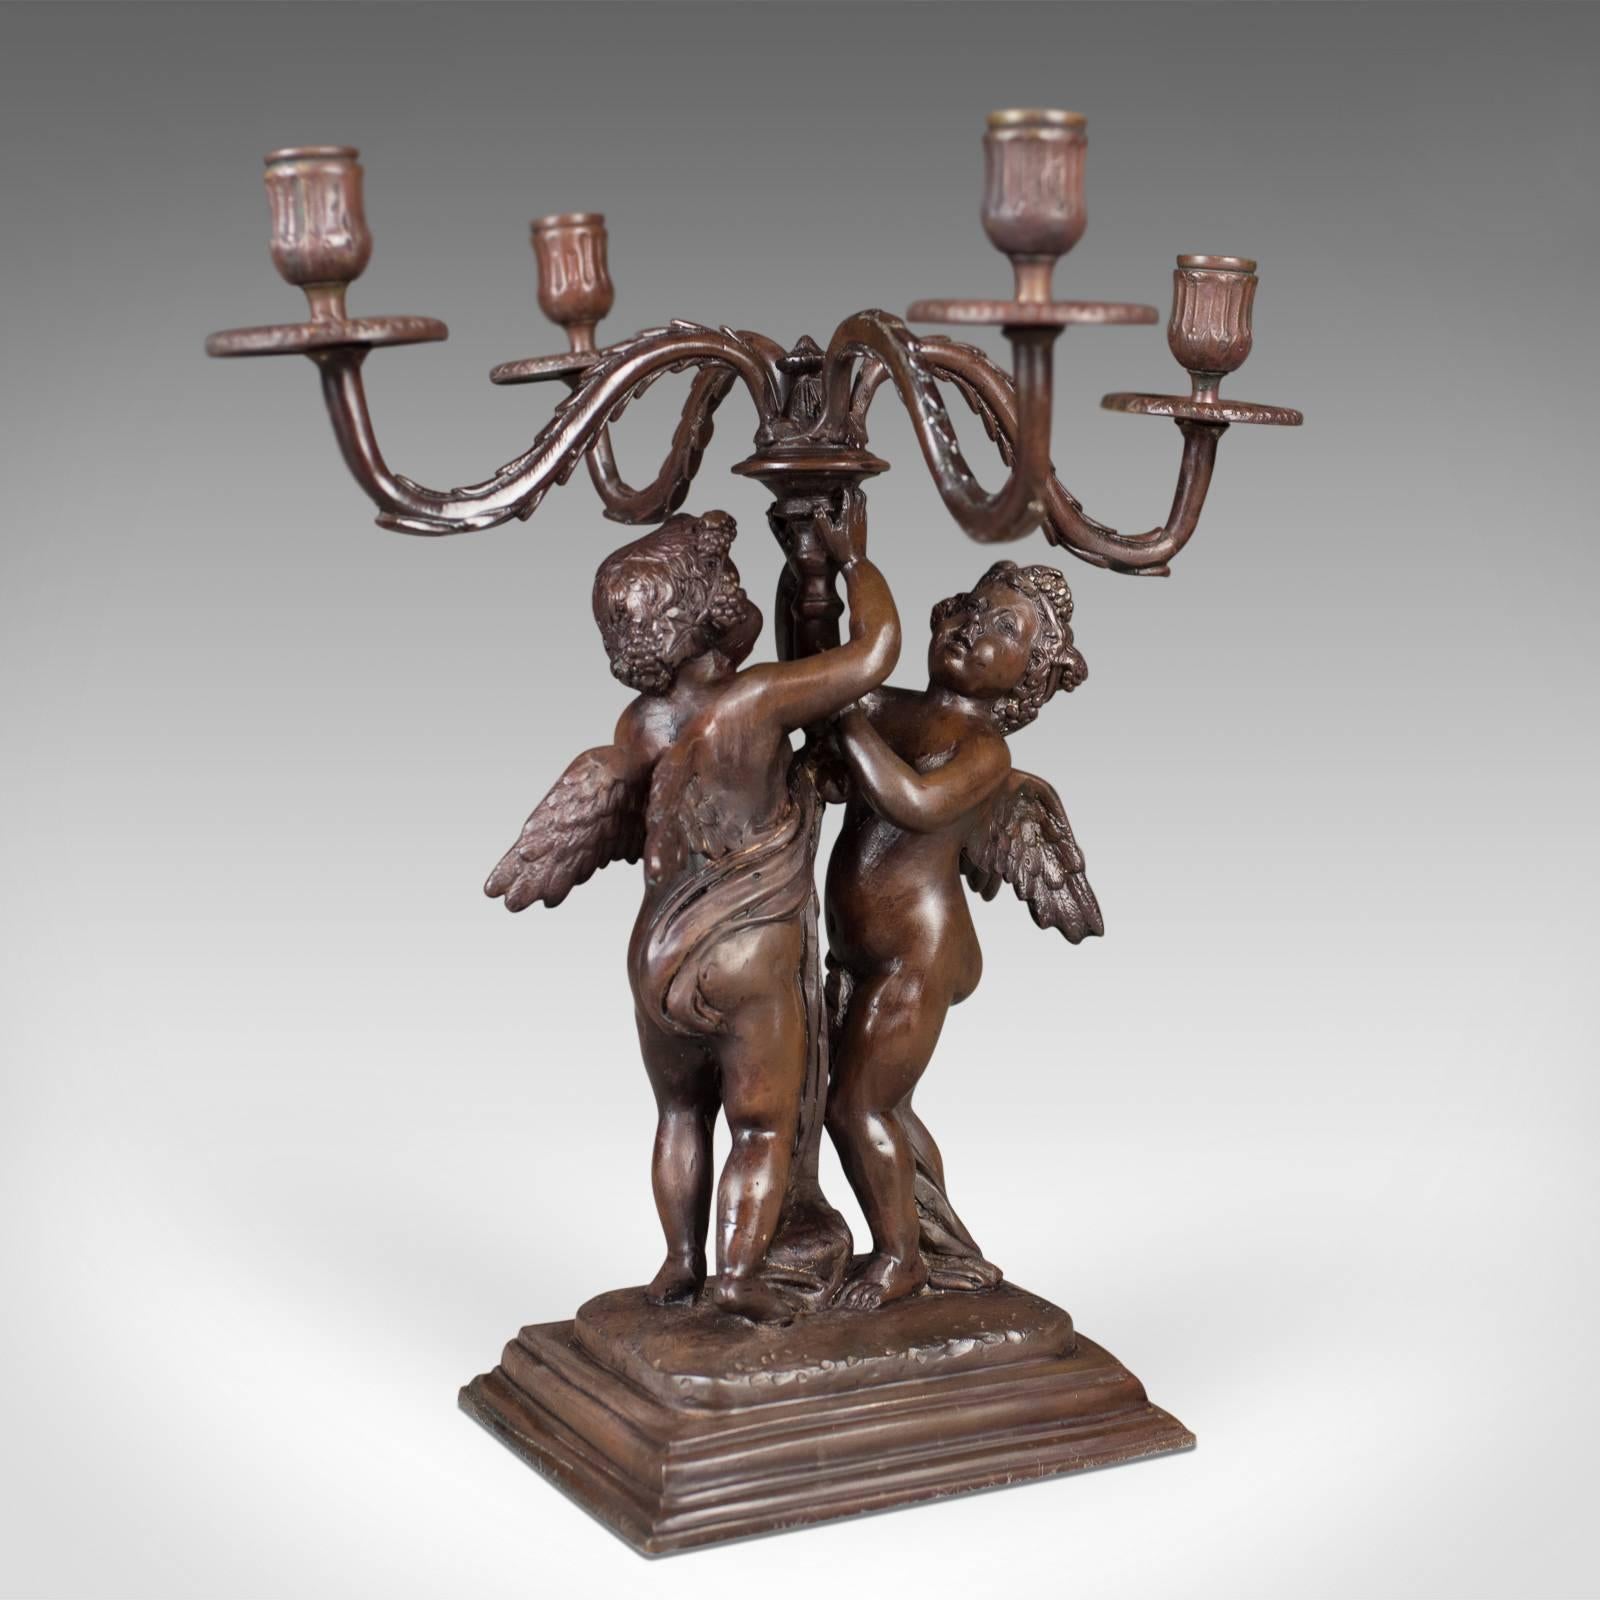 This is an attractive bronze girandole candelabra, a four branch Victorian revival candlestick dating to the mid-20th century, circa 1960.

Raised on a stepped plinth base
A pair of winged cherubs elevate the girandole
Four sinuous branches